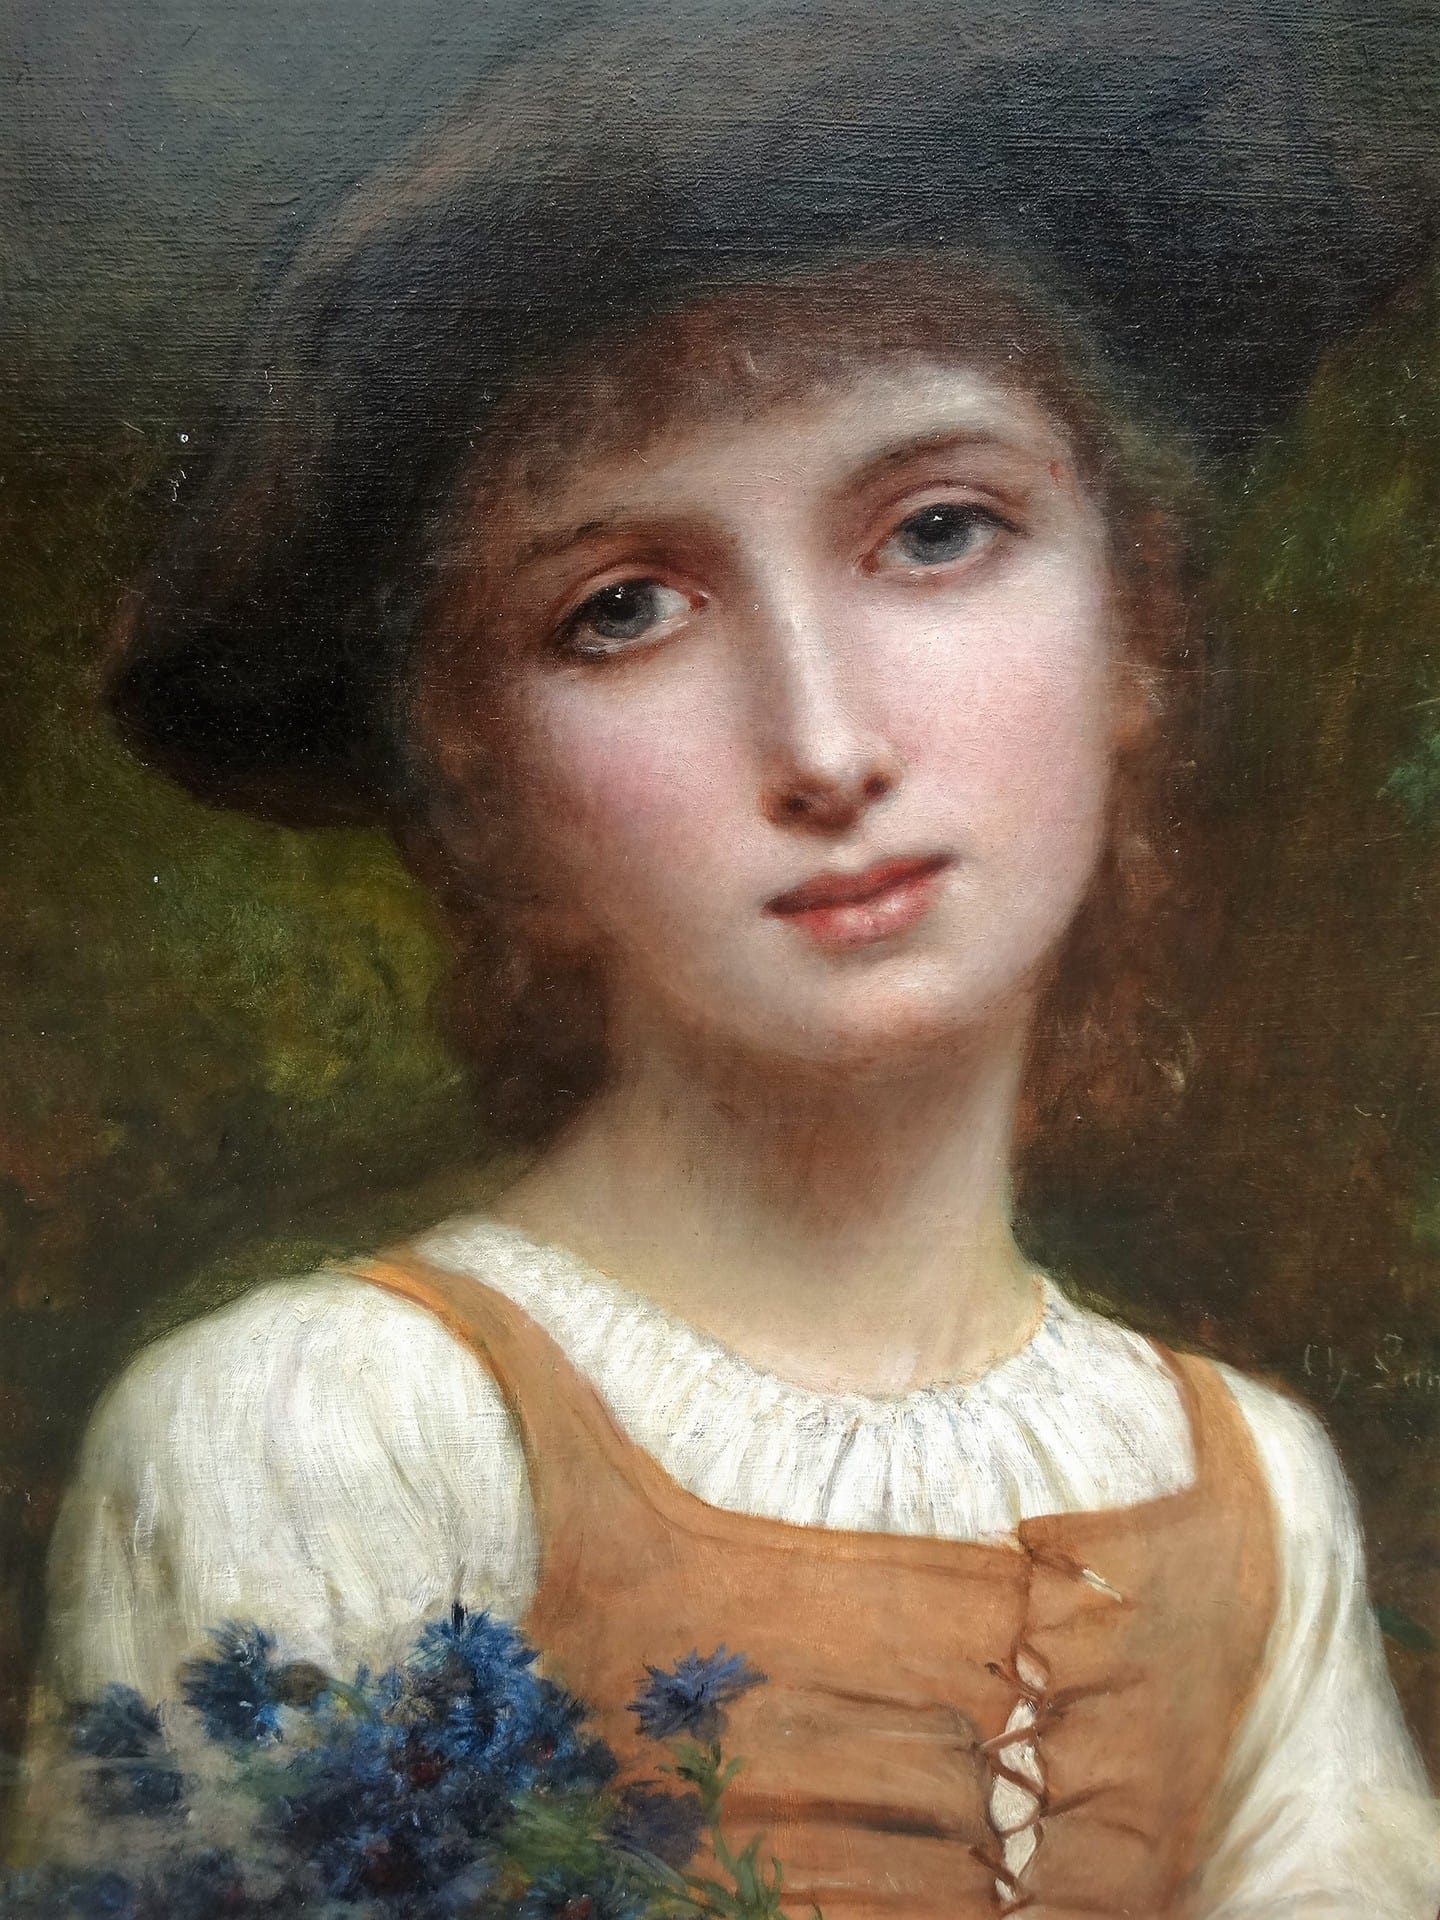 Charles Landelle's "Portrait of a Young Girl". A portrait of a young girl with luminous blue eyes, short light hair, and a European peasant's dress. She holds deep blue flowers